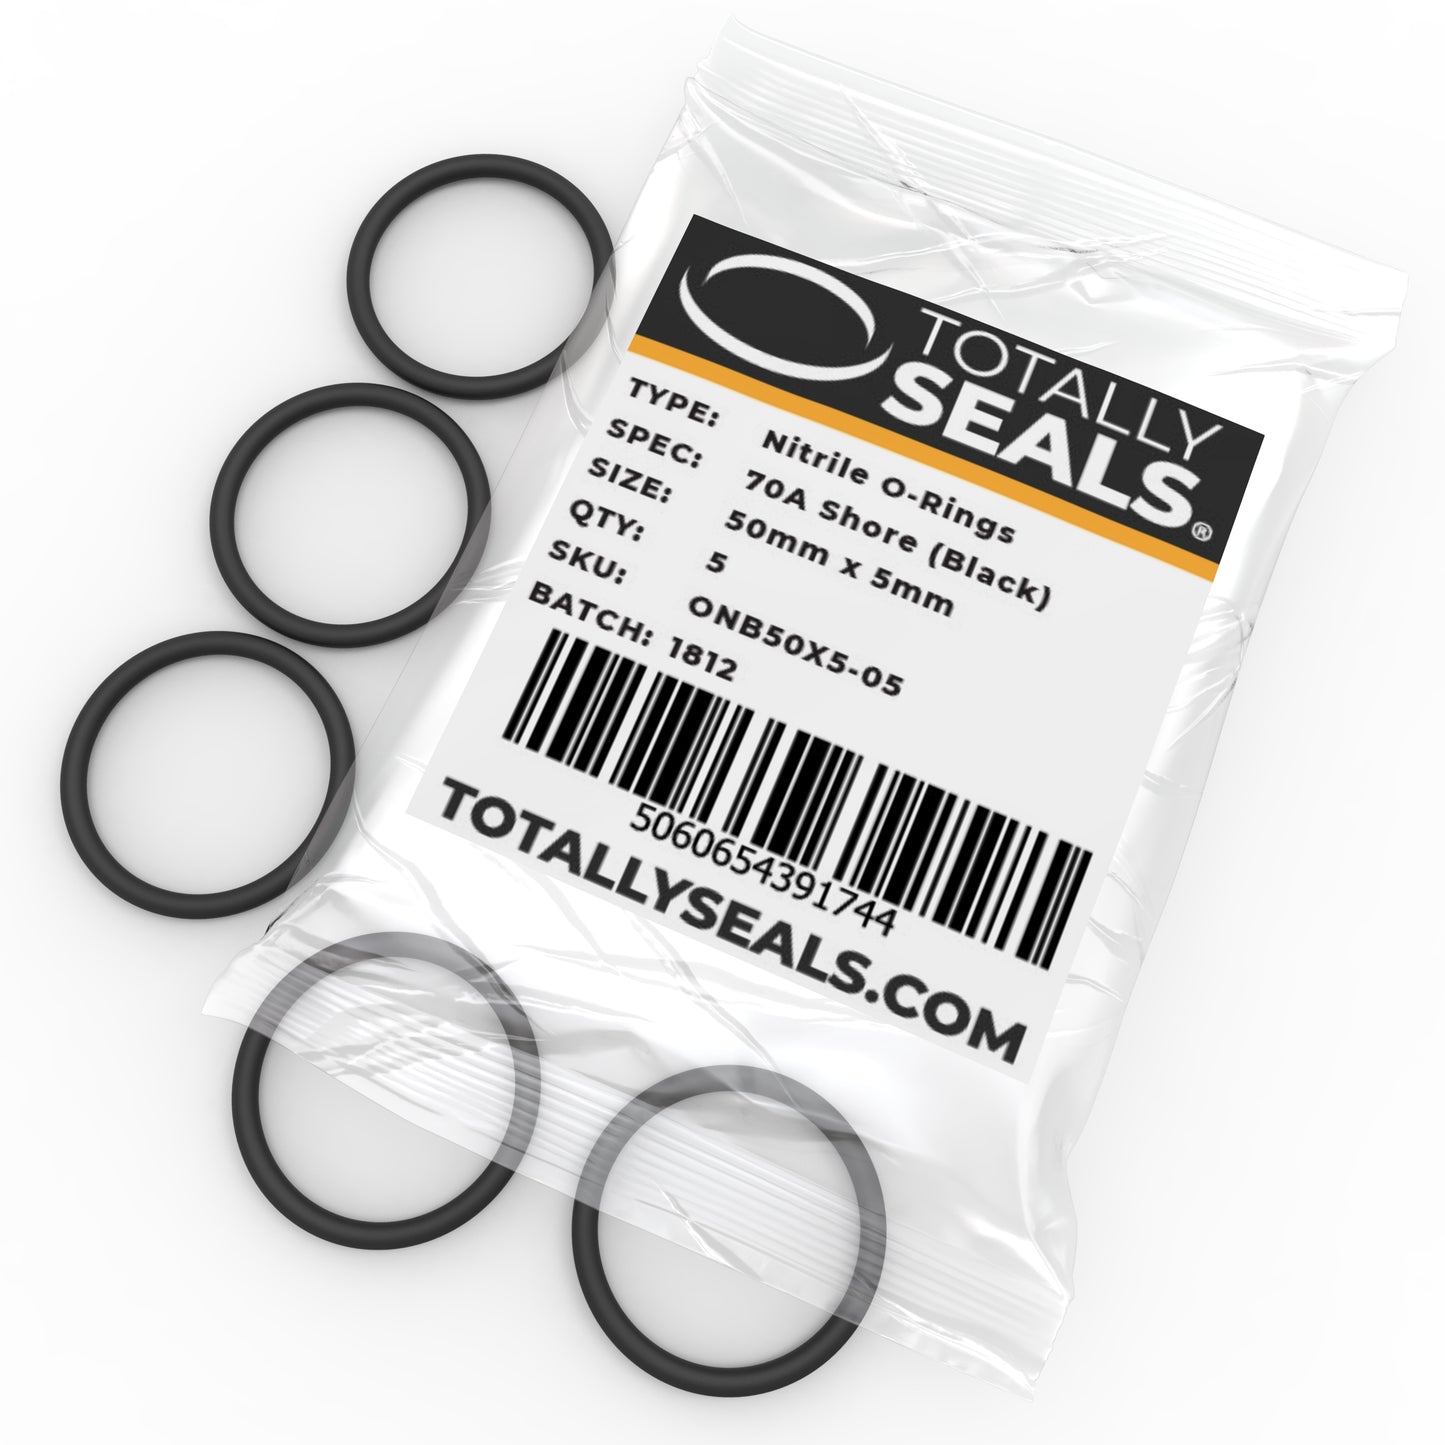 50mm x 5mm (60mm OD) Nitrile O-Rings - Totally Seals®